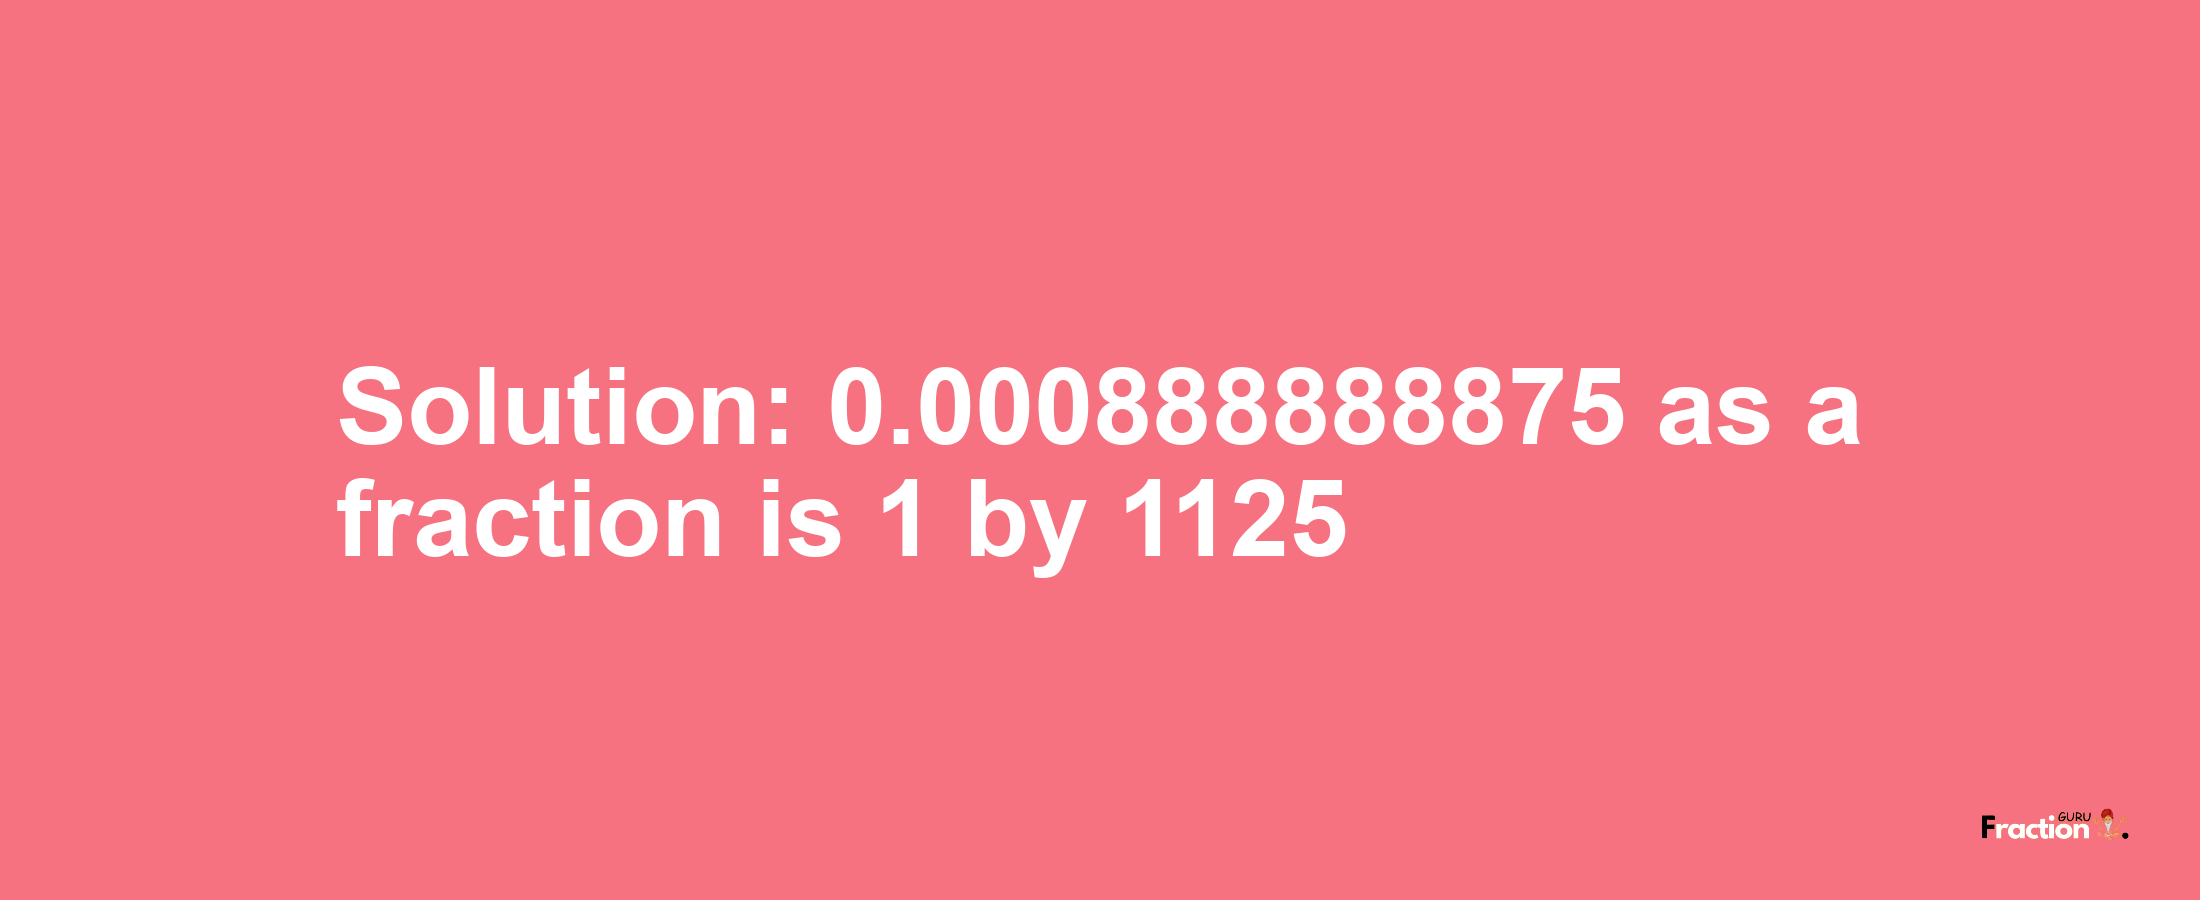 Solution:0.000888888875 as a fraction is 1/1125